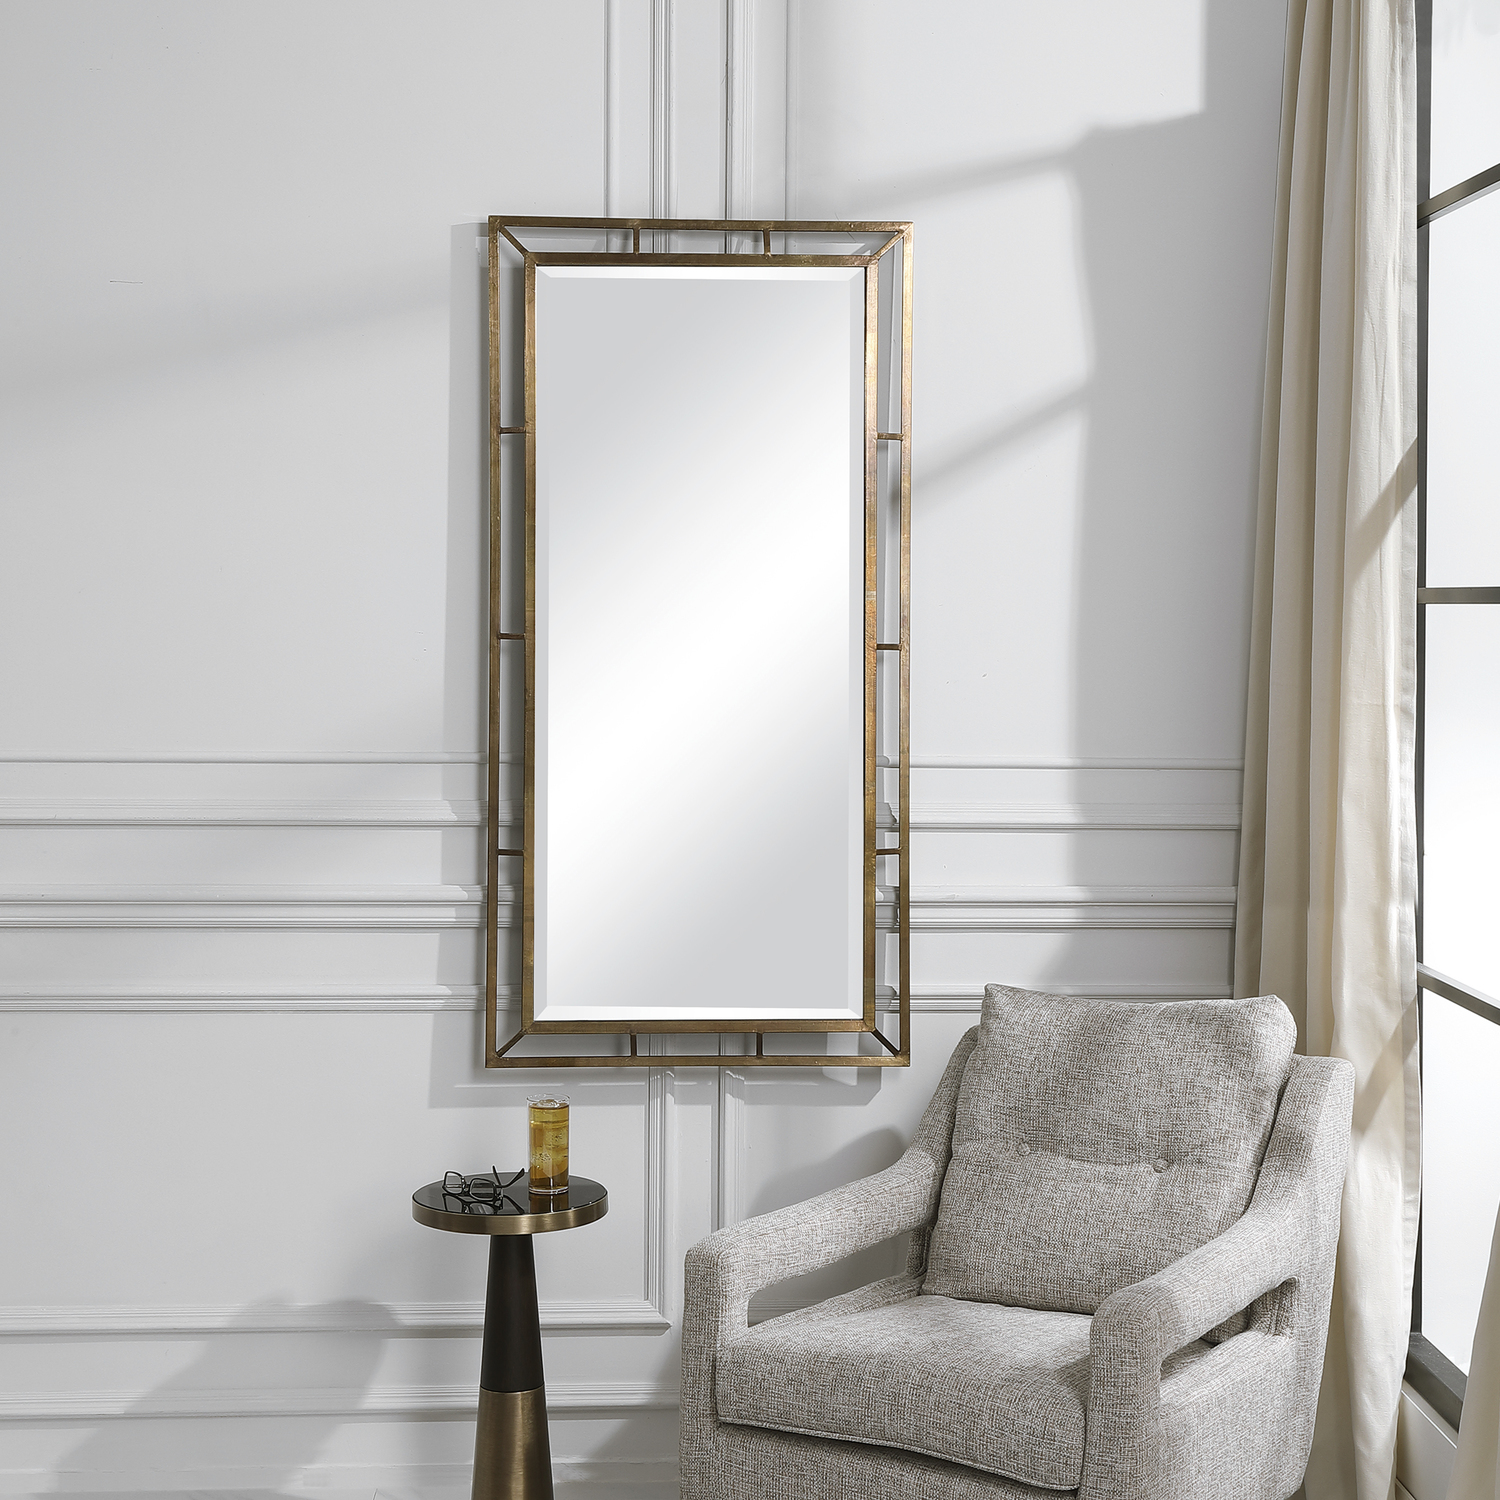 oval long mirror Uttermost Industrial Mirror Simple In Design Yet Refined In Style, This Mirror Is Accented By A Solid Iron Frame Dressed In A Copper Cladding. The 3-dimensional Frame Brings Additional Interest To The Design And Is Complemented By A Generous 1 1/4" Bevel. May Be Hung Horizontal Or Vertical.